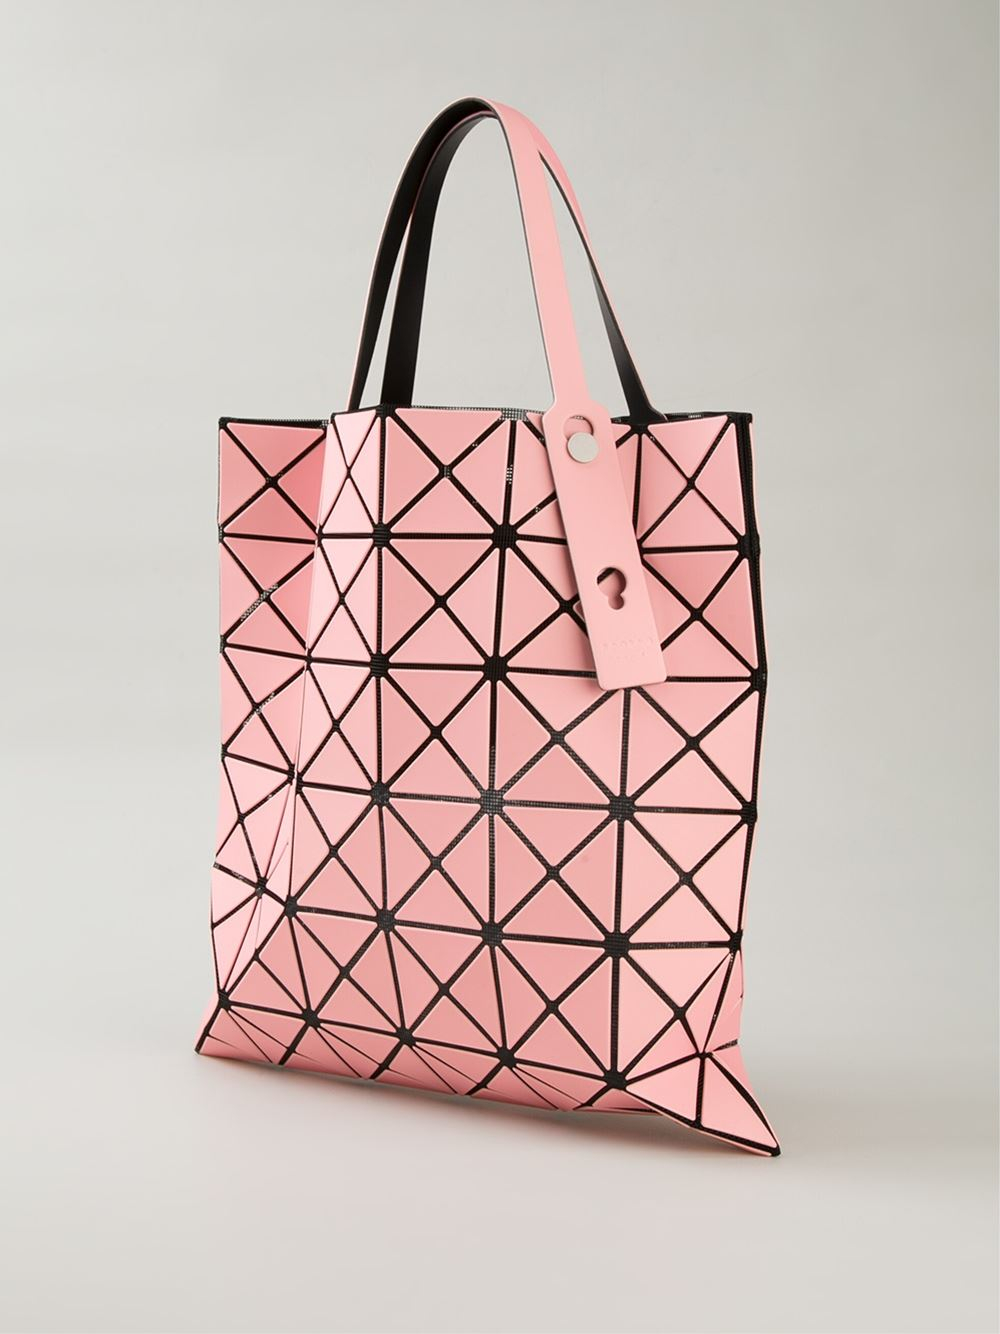 Lyst - Bao Bao Issey Miyake Prism Open-top Tote in Pink